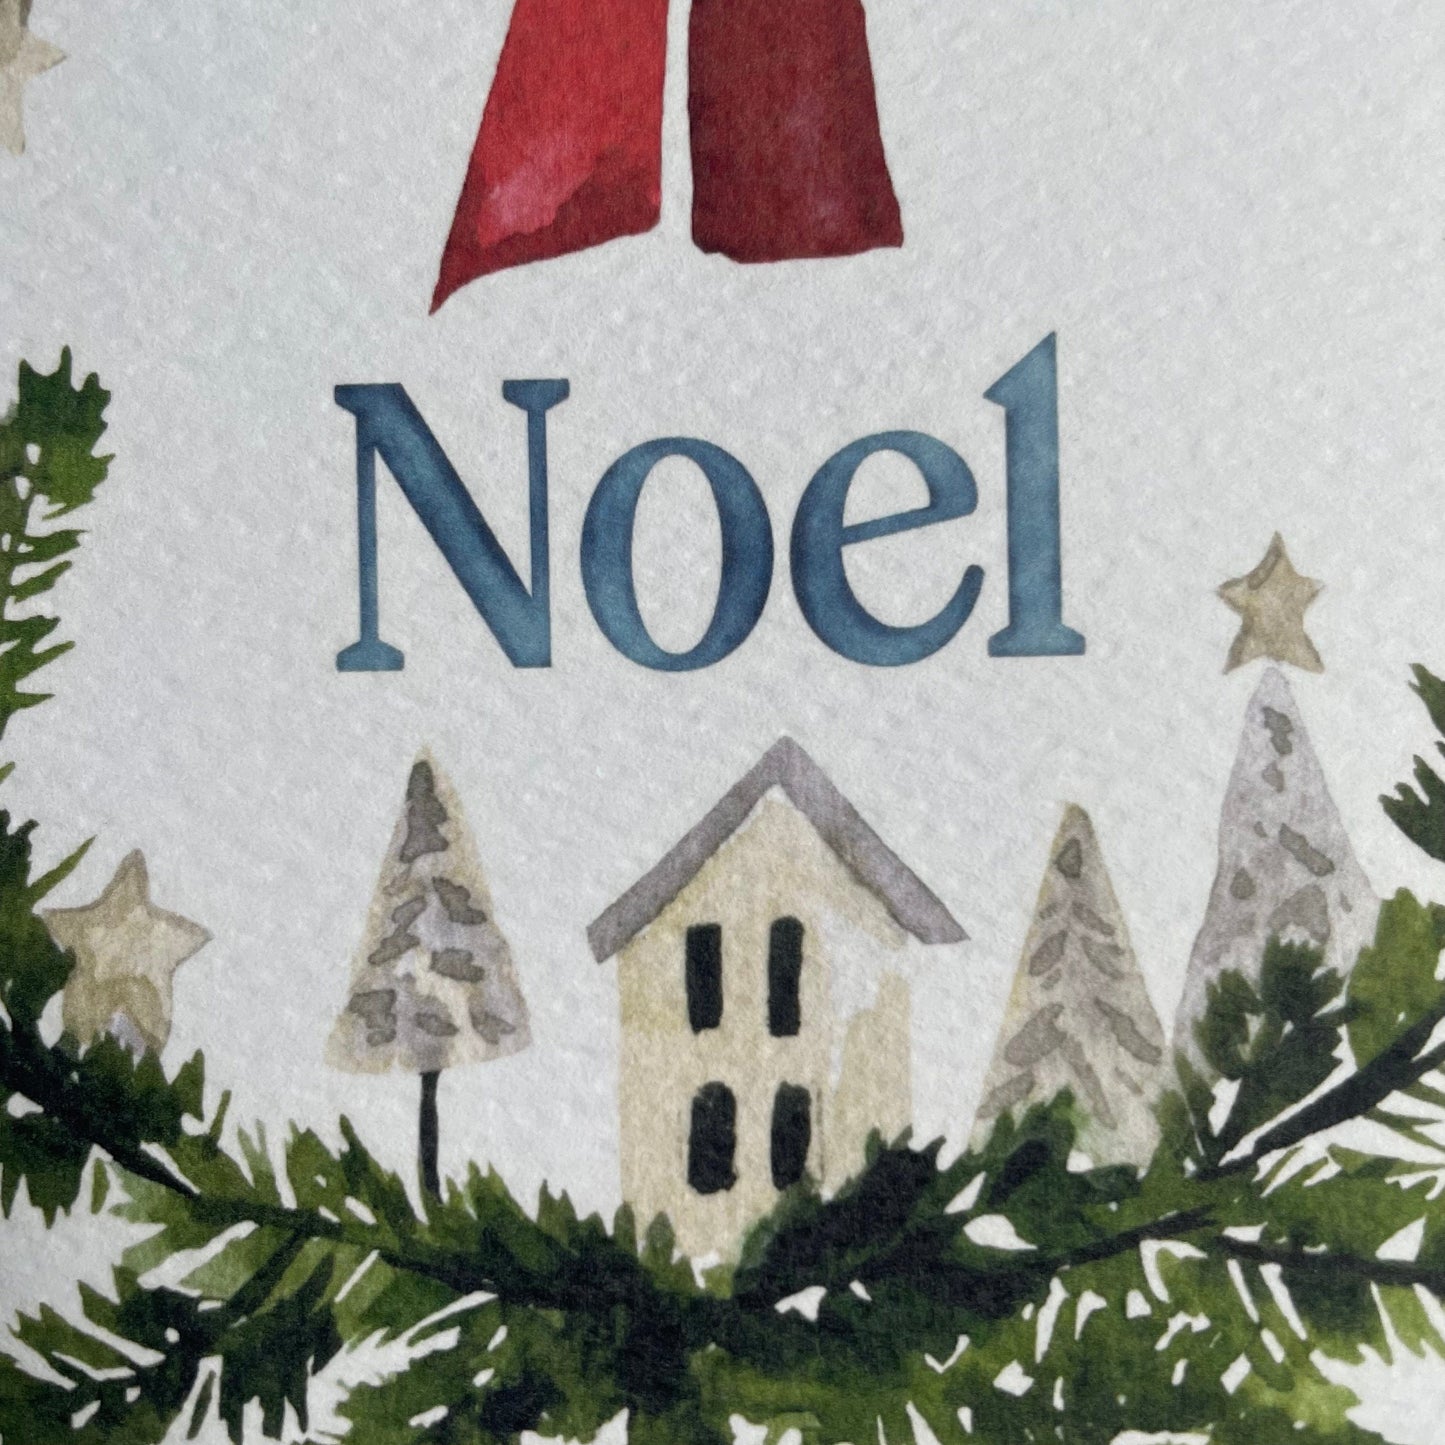 And Hope Designs Cards Christmas card - Noel with fir branch wreath